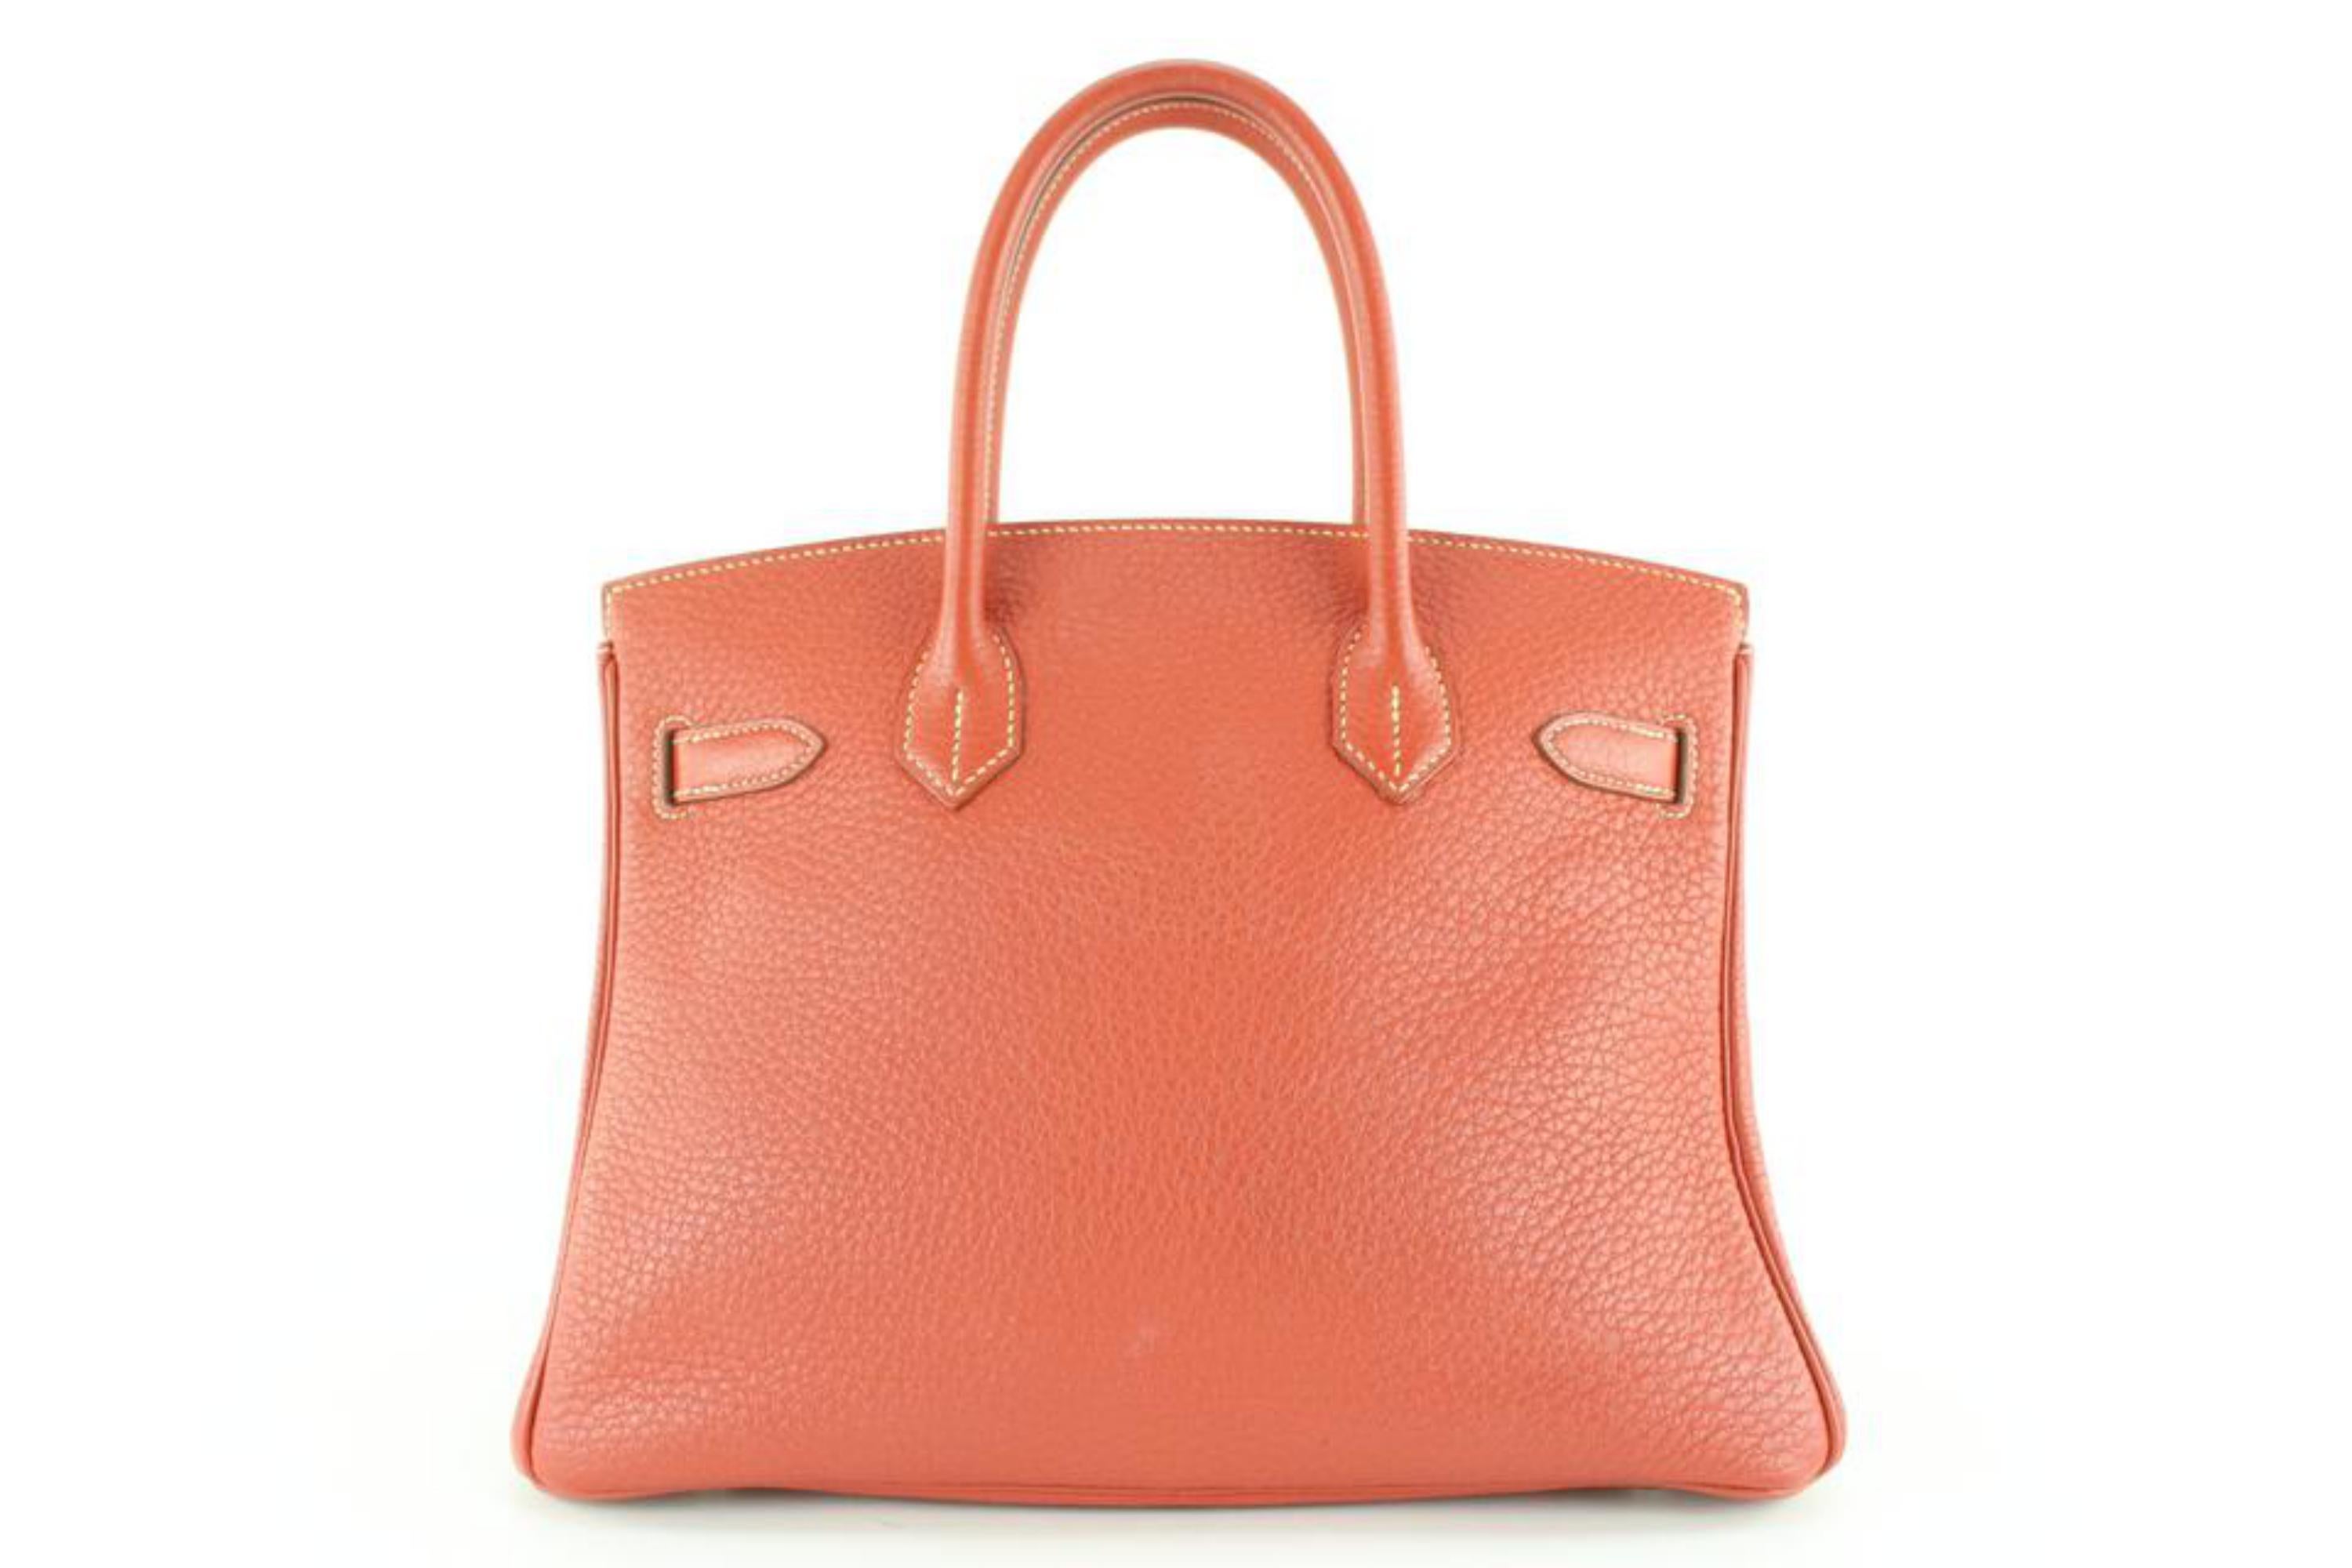 Hermès Sanguine Togo Leather Birkin 30 2H1028 In Excellent Condition For Sale In Dix hills, NY